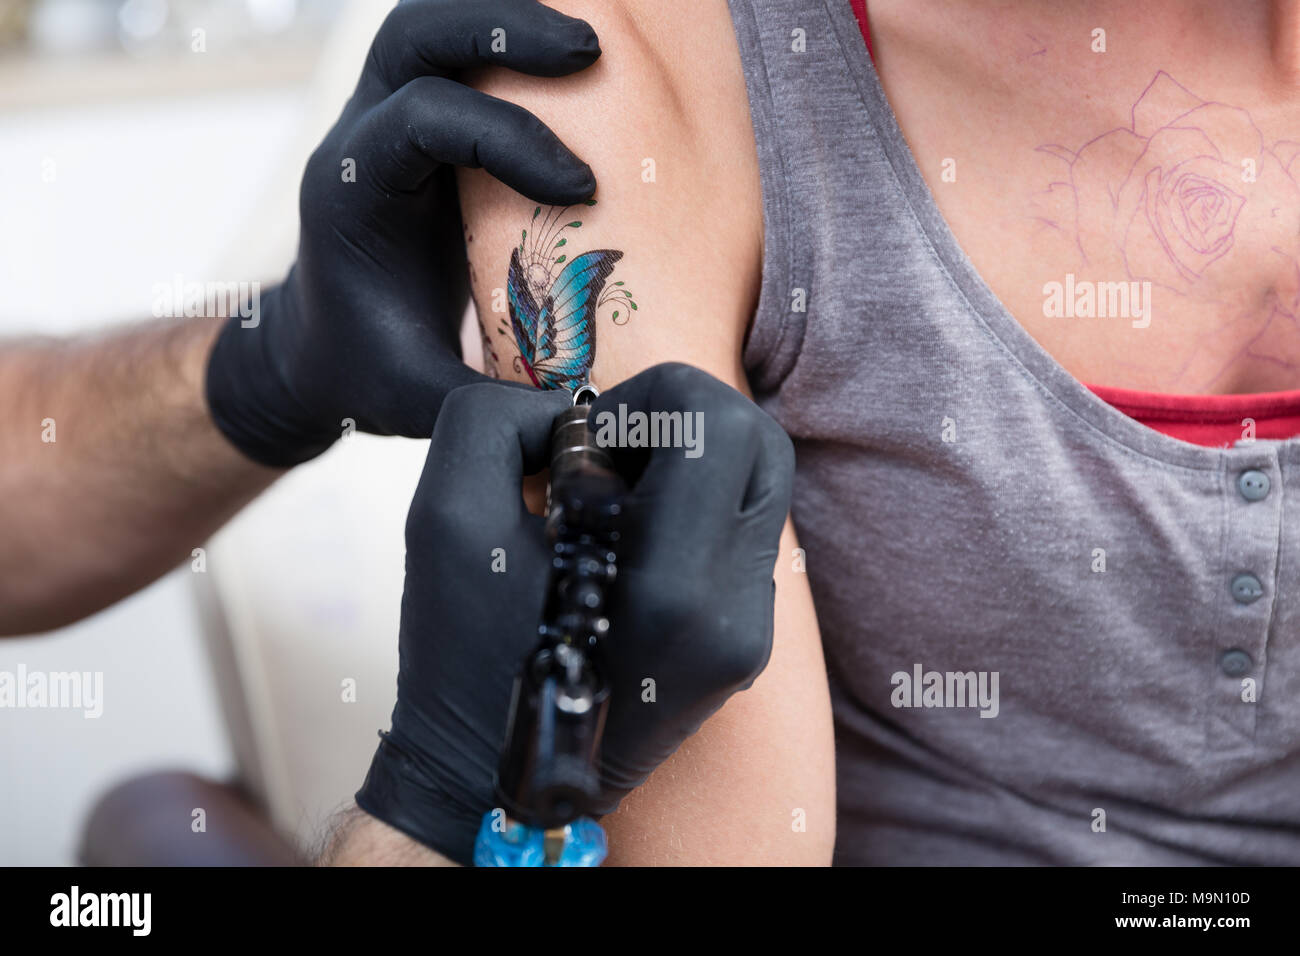 Hands of a cautious artist wrapping with dry plastic the new tattoo Stock Photo